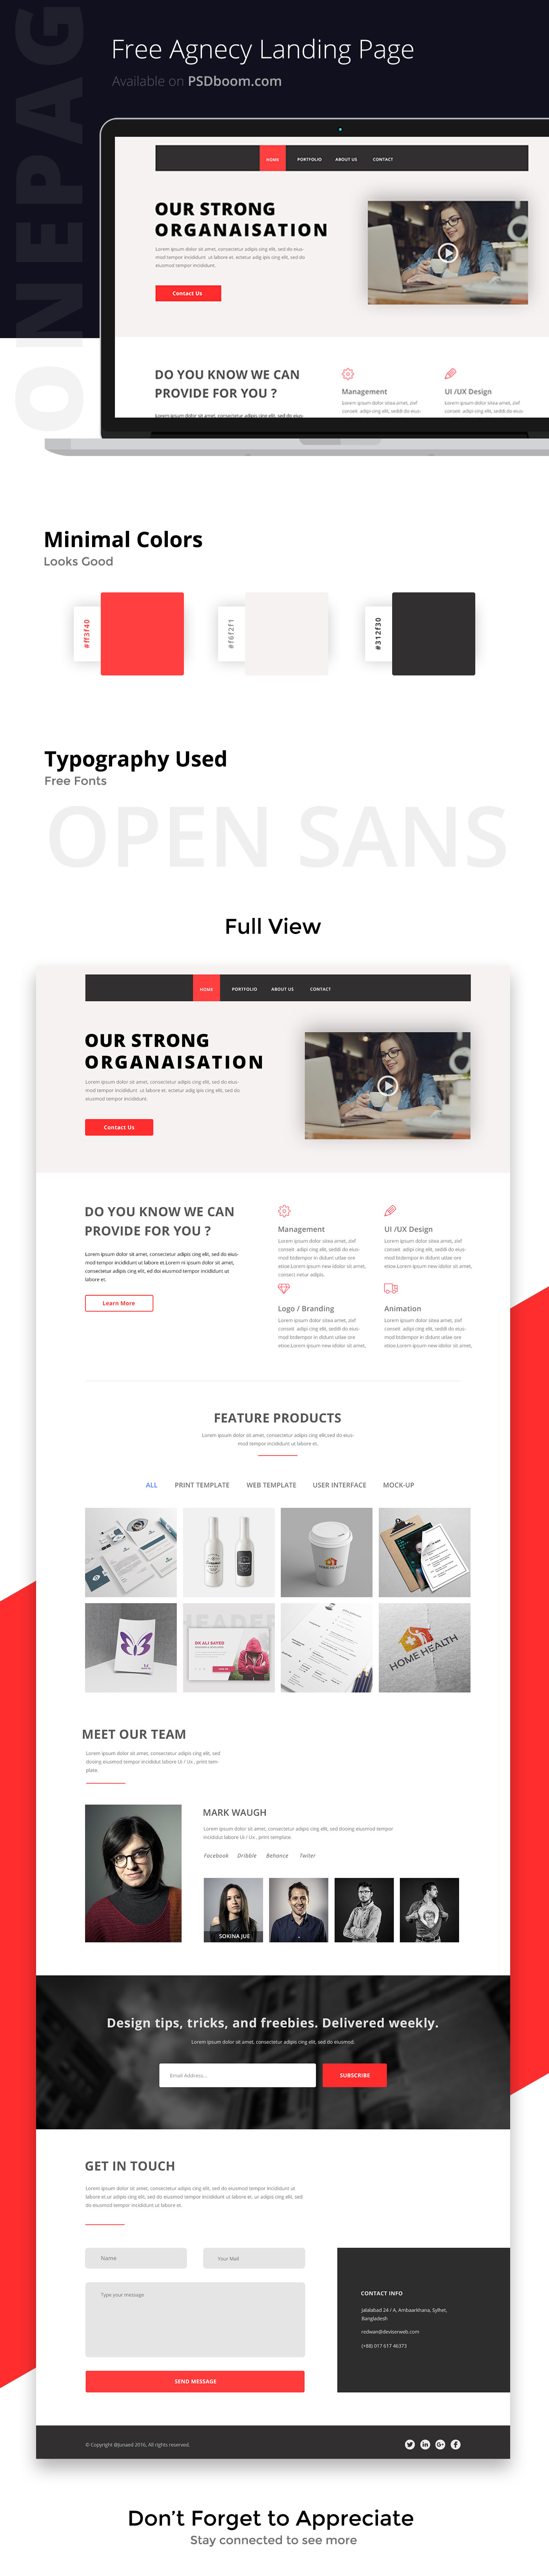 free-psd-agency-corporate-landing-page-template-1170-grid-bootstrap